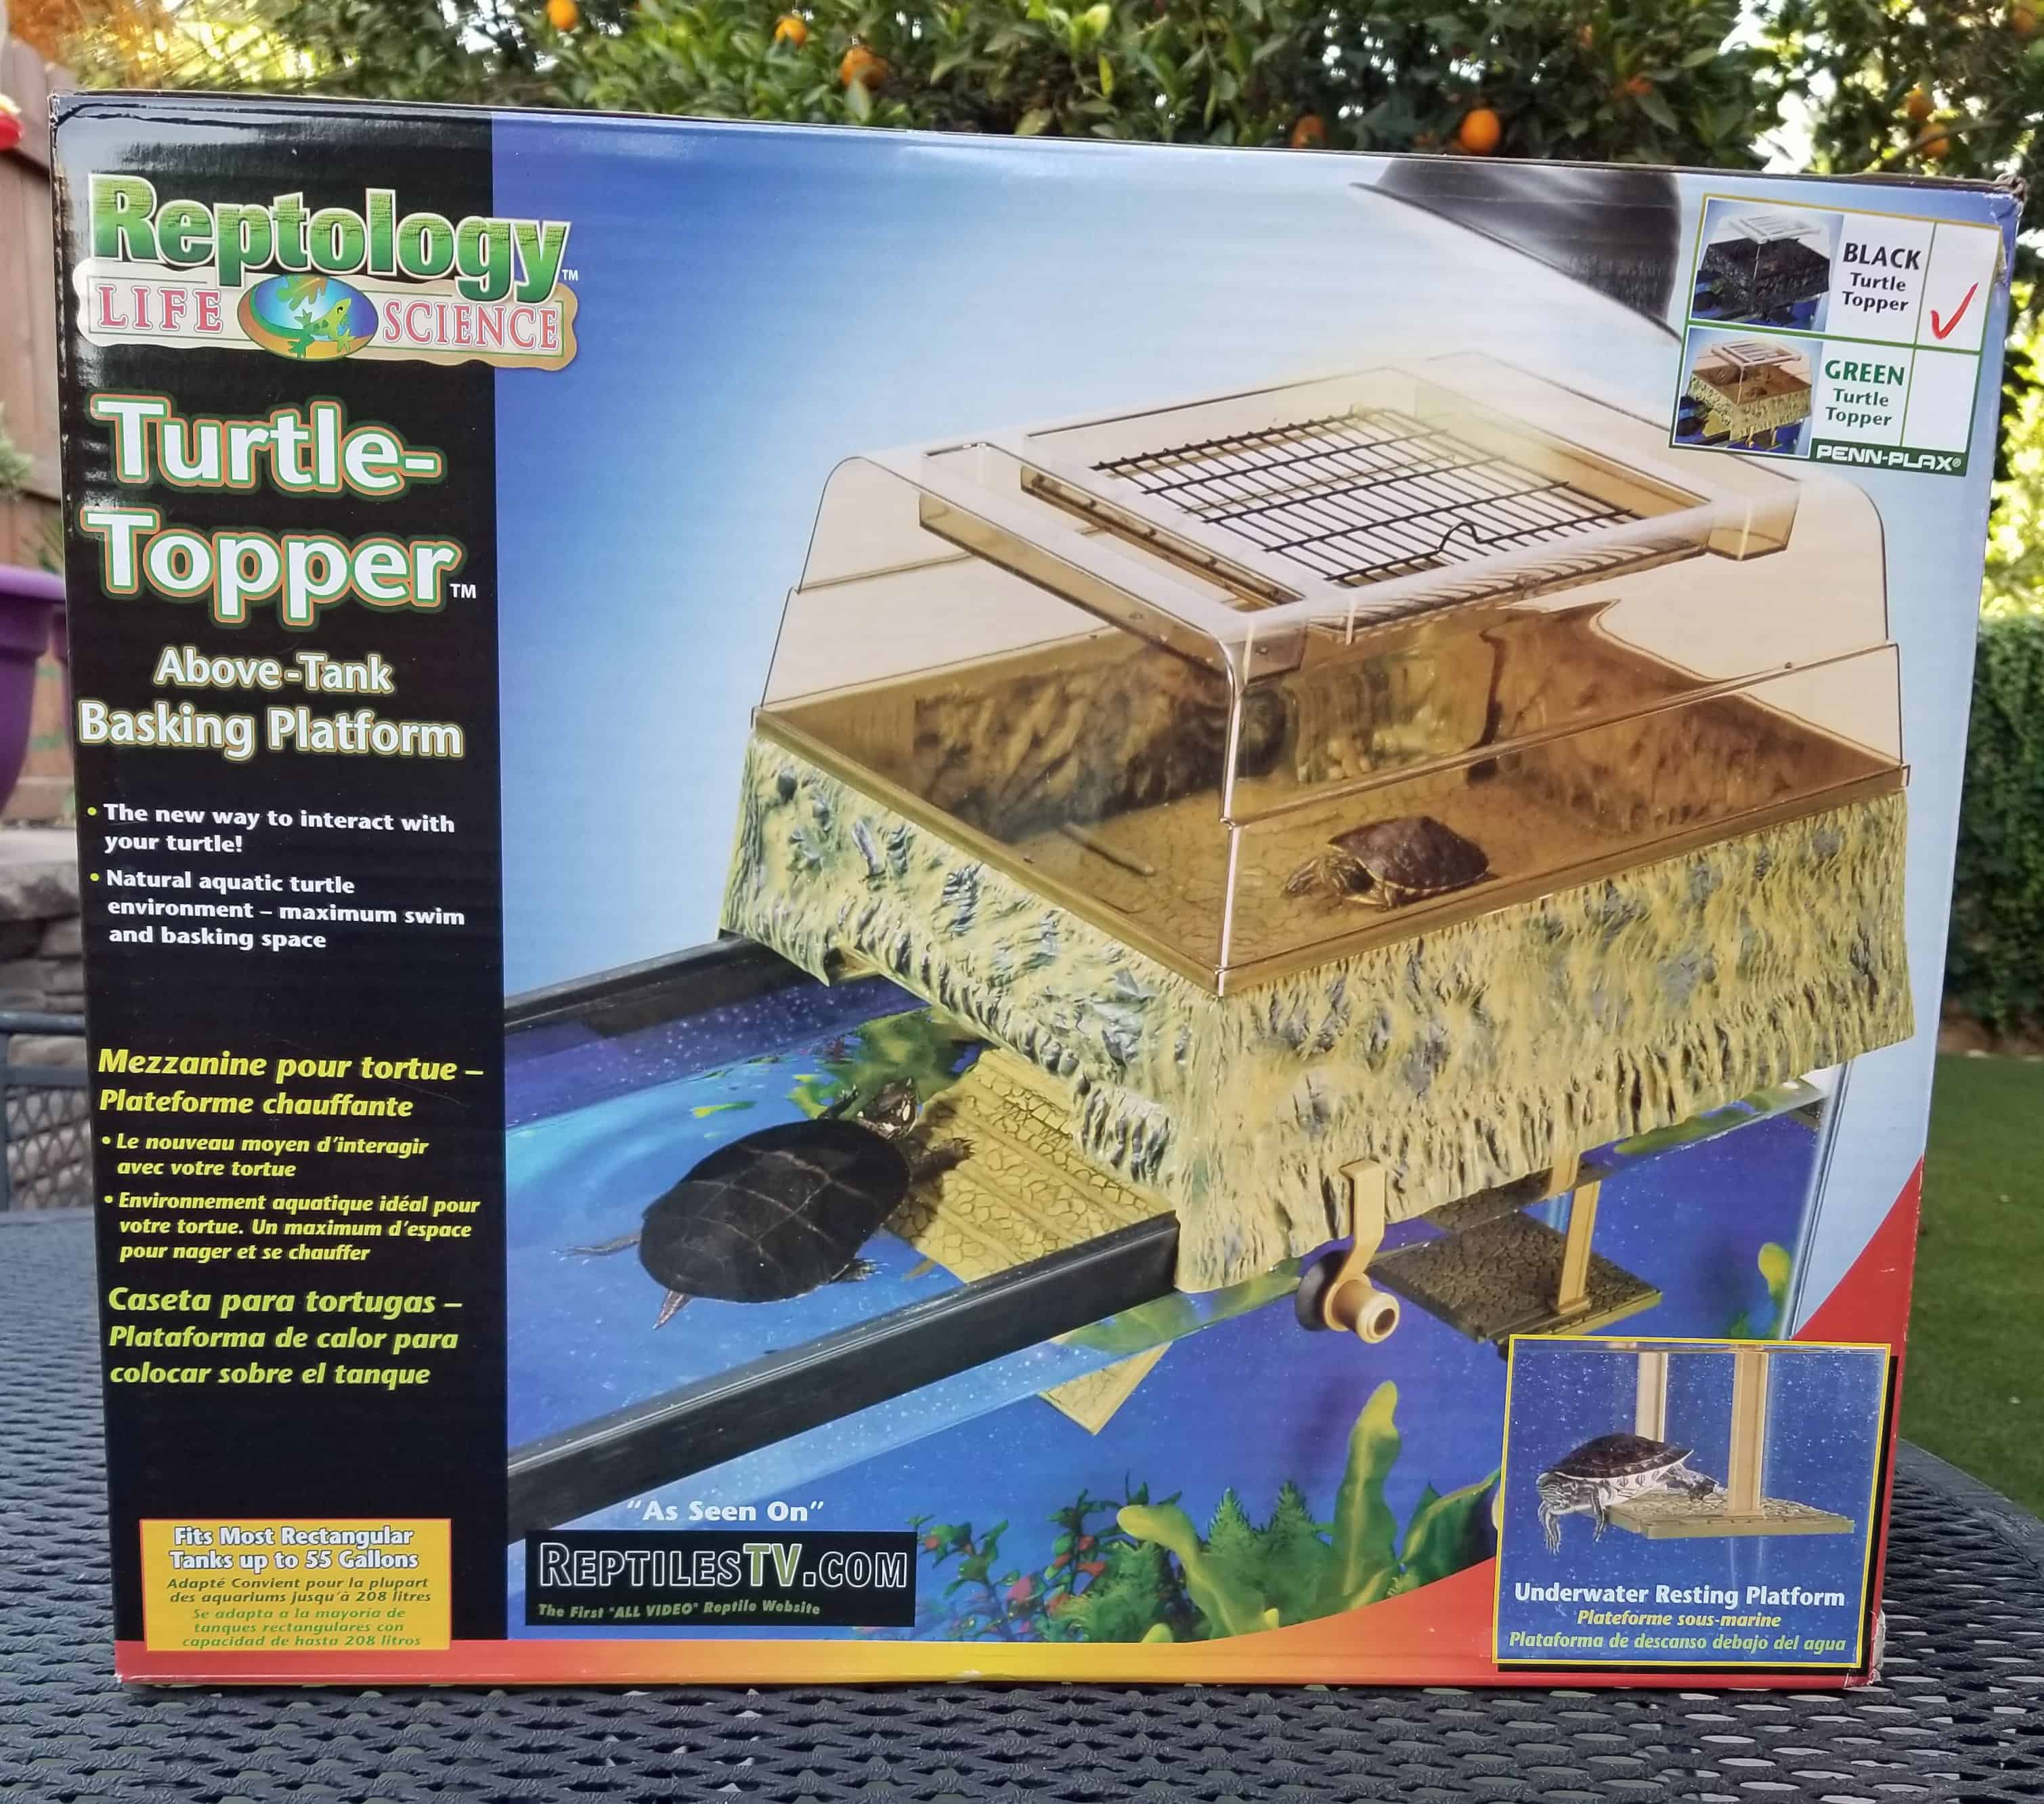 Yurtle the World’s Happiest Turtle & His Turtle Topper